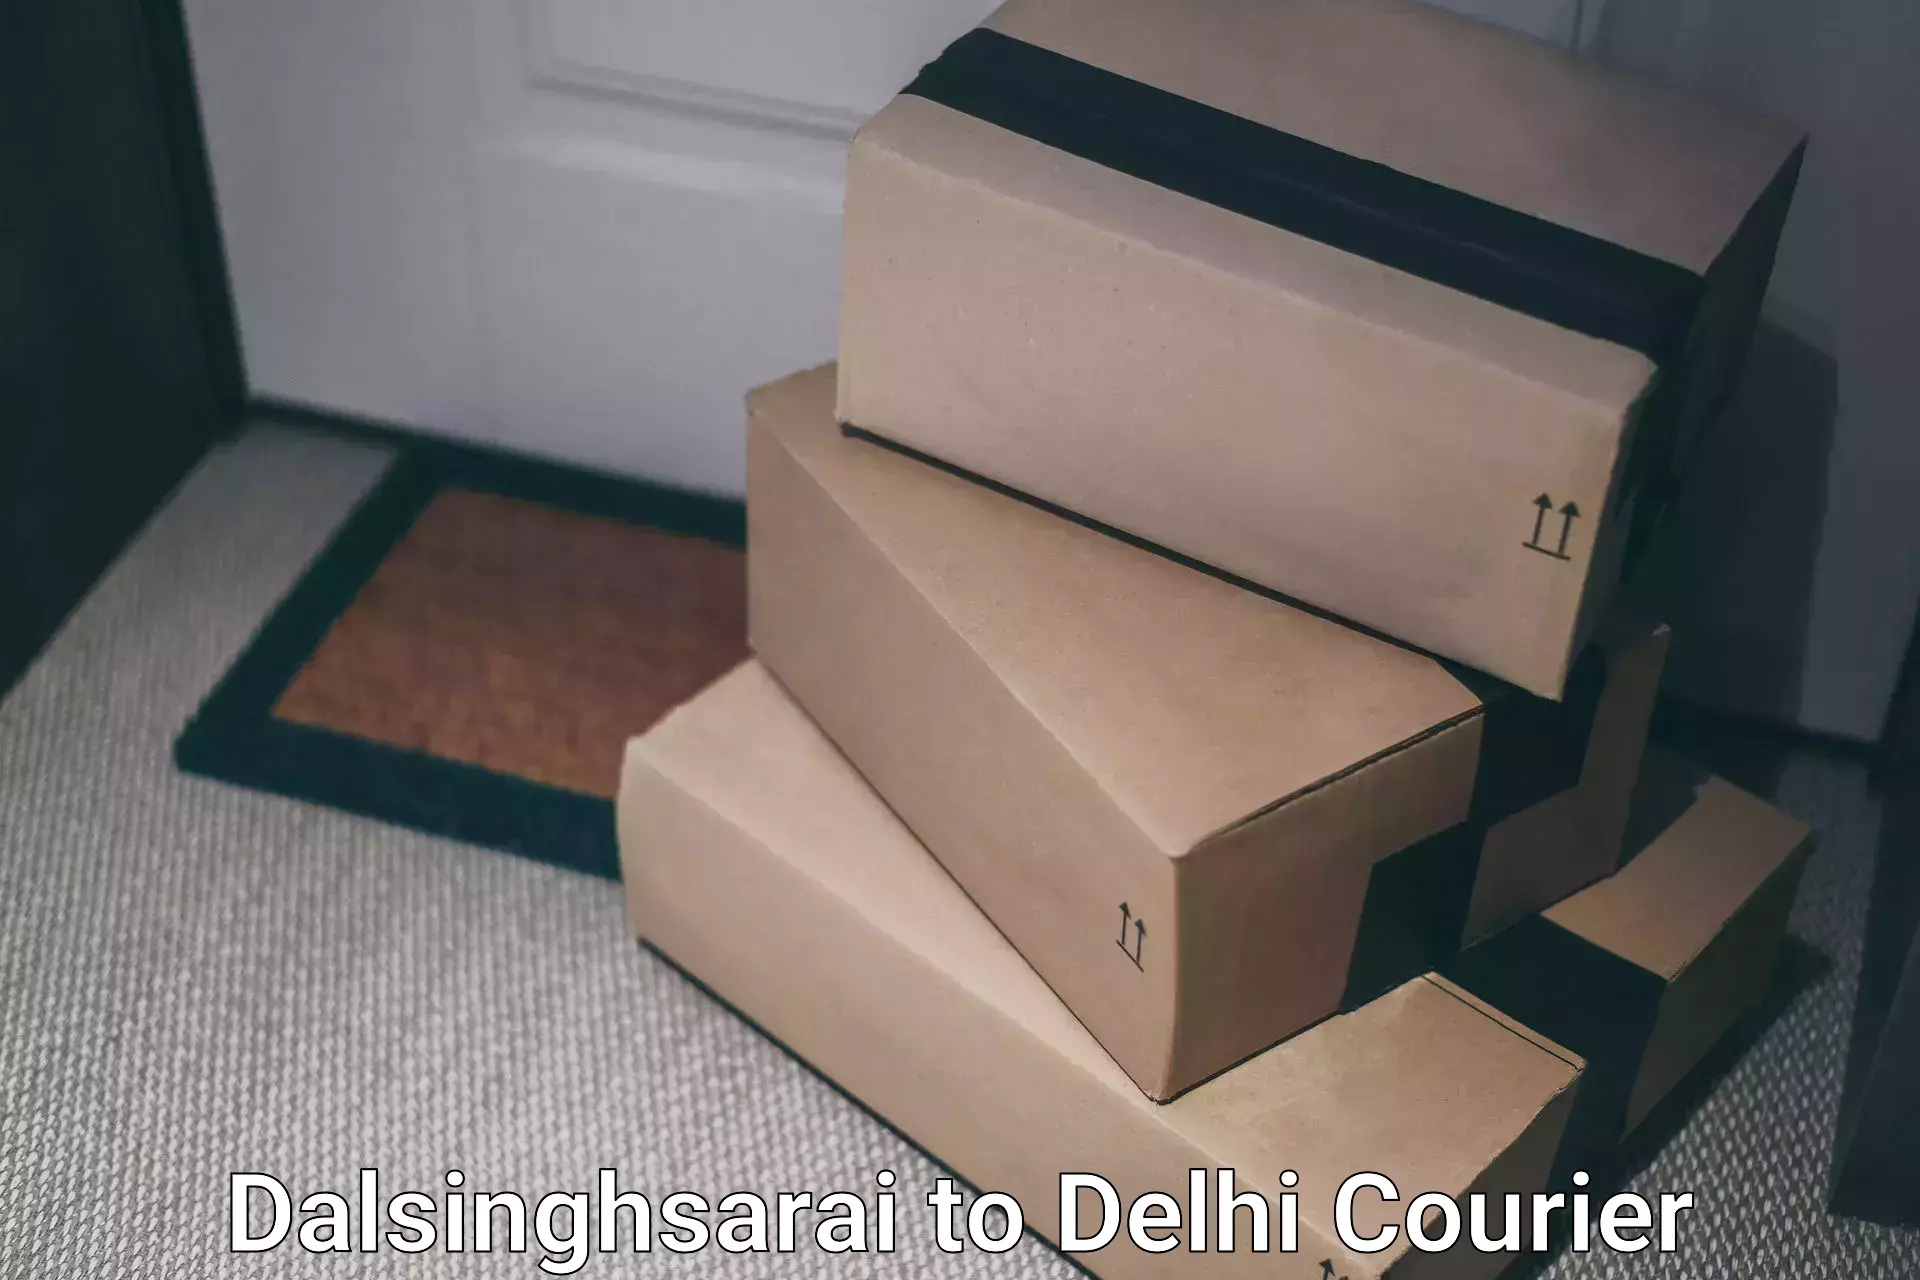 Global courier networks Dalsinghsarai to Indraprastha